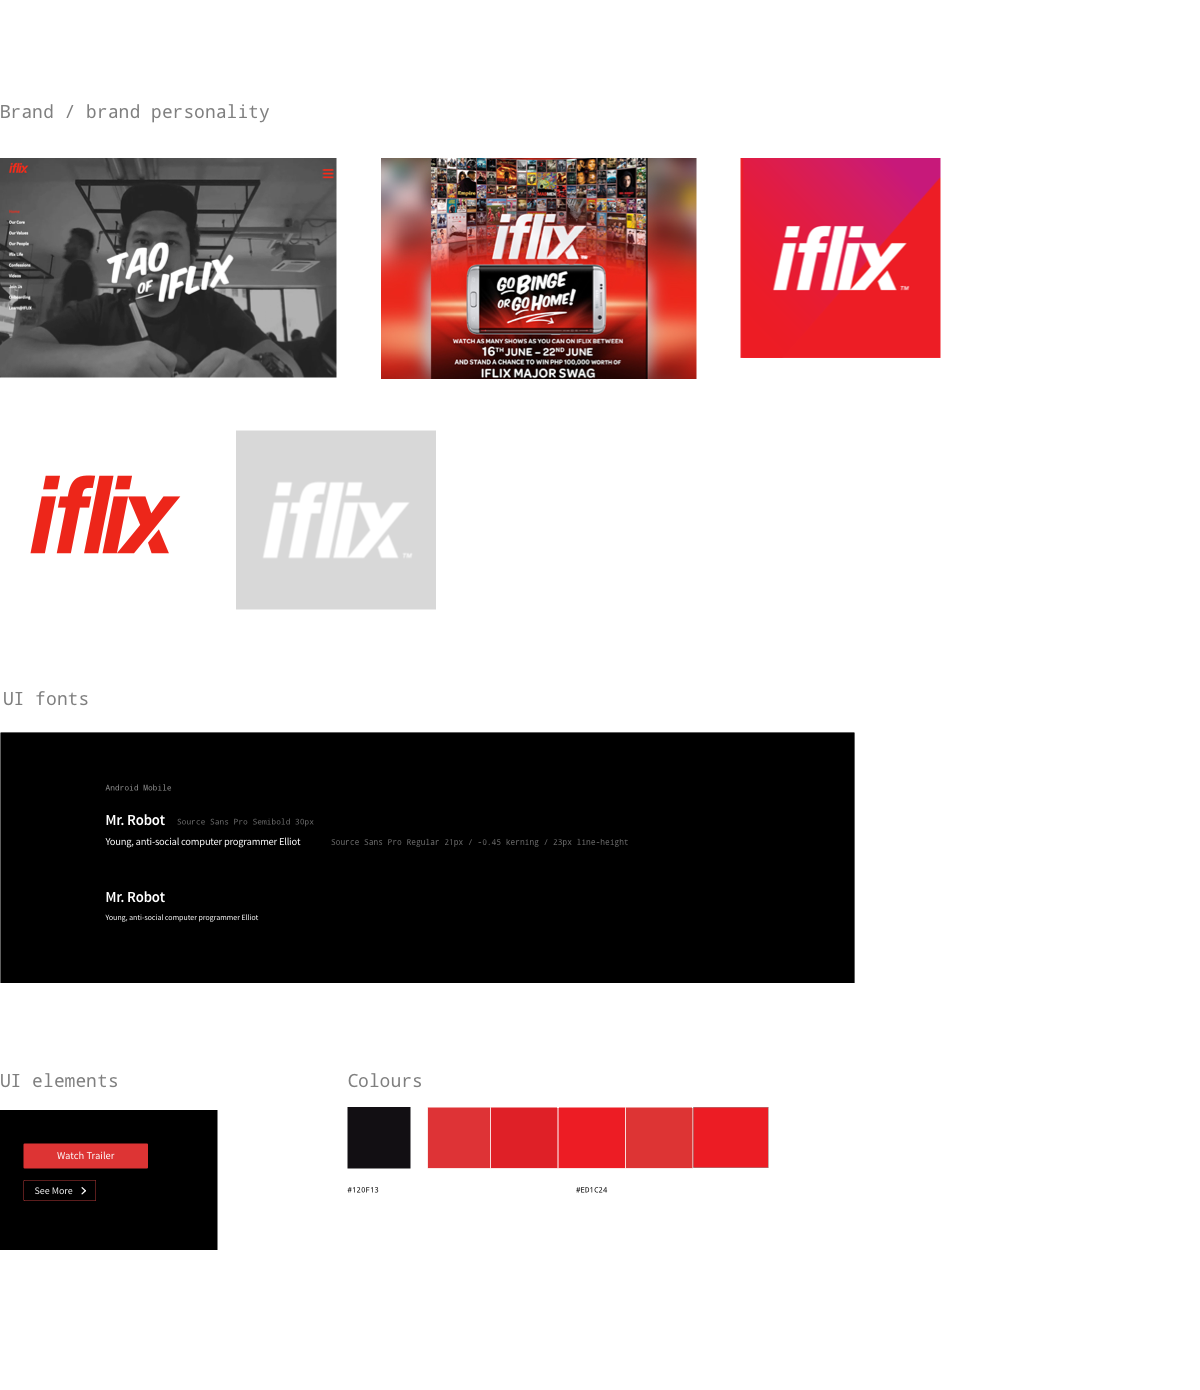 Screenshot of some brand elements, including the iflix company culture site, logos, colours, fonts and UI elements.